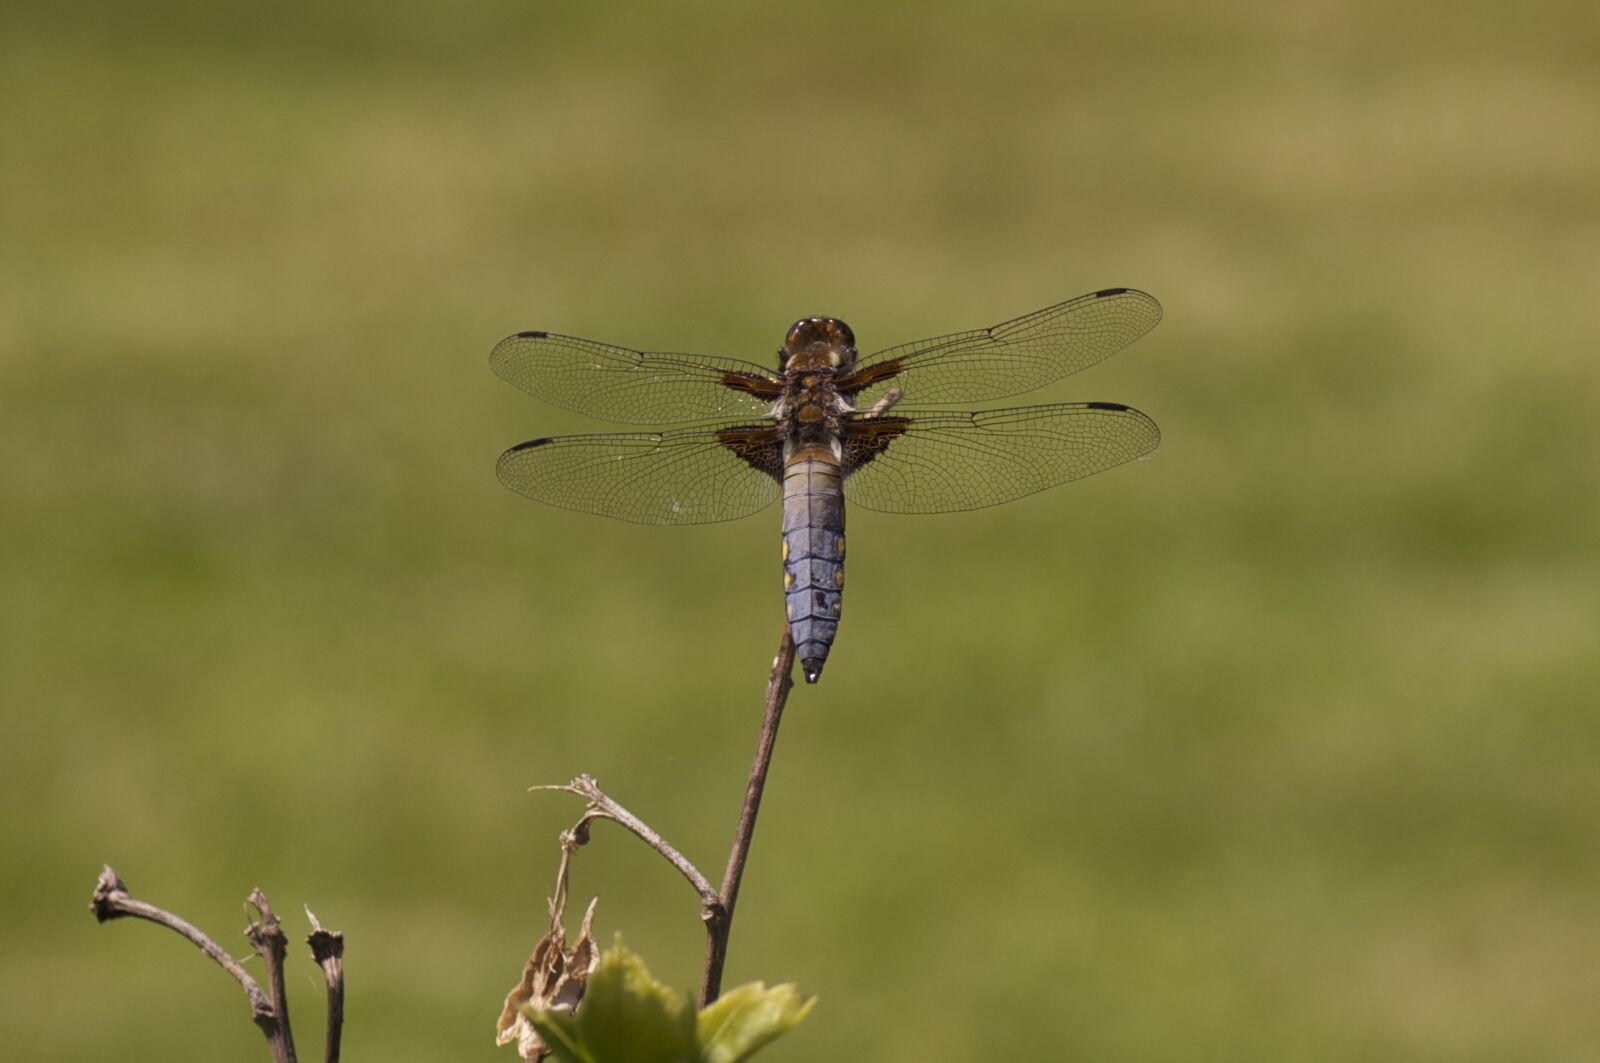 Pentax K20D sample photo. Dragonfly, insect, nature photography